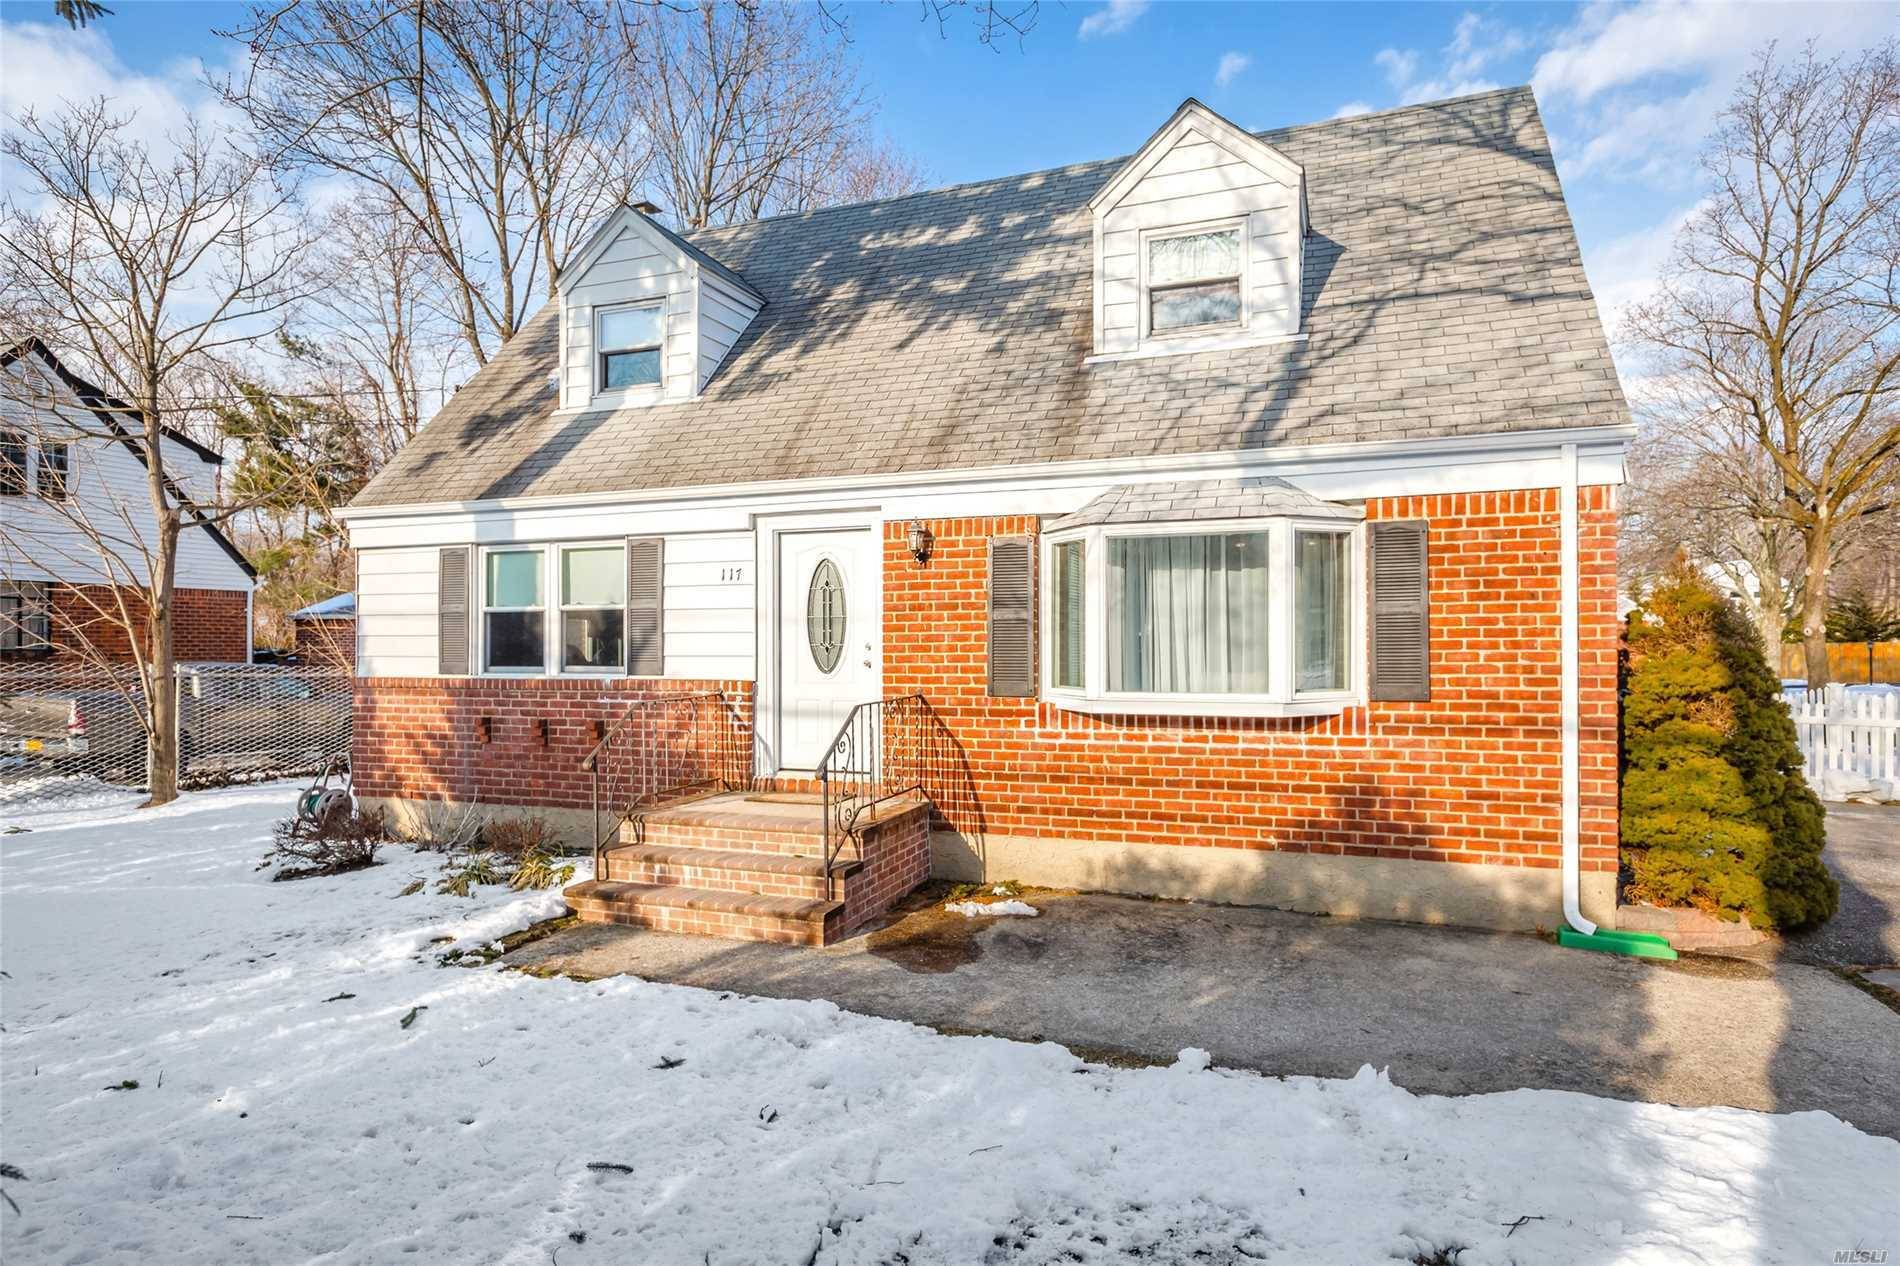 Just Move In To This Warm Inviting Updated Home In Elwood School District.